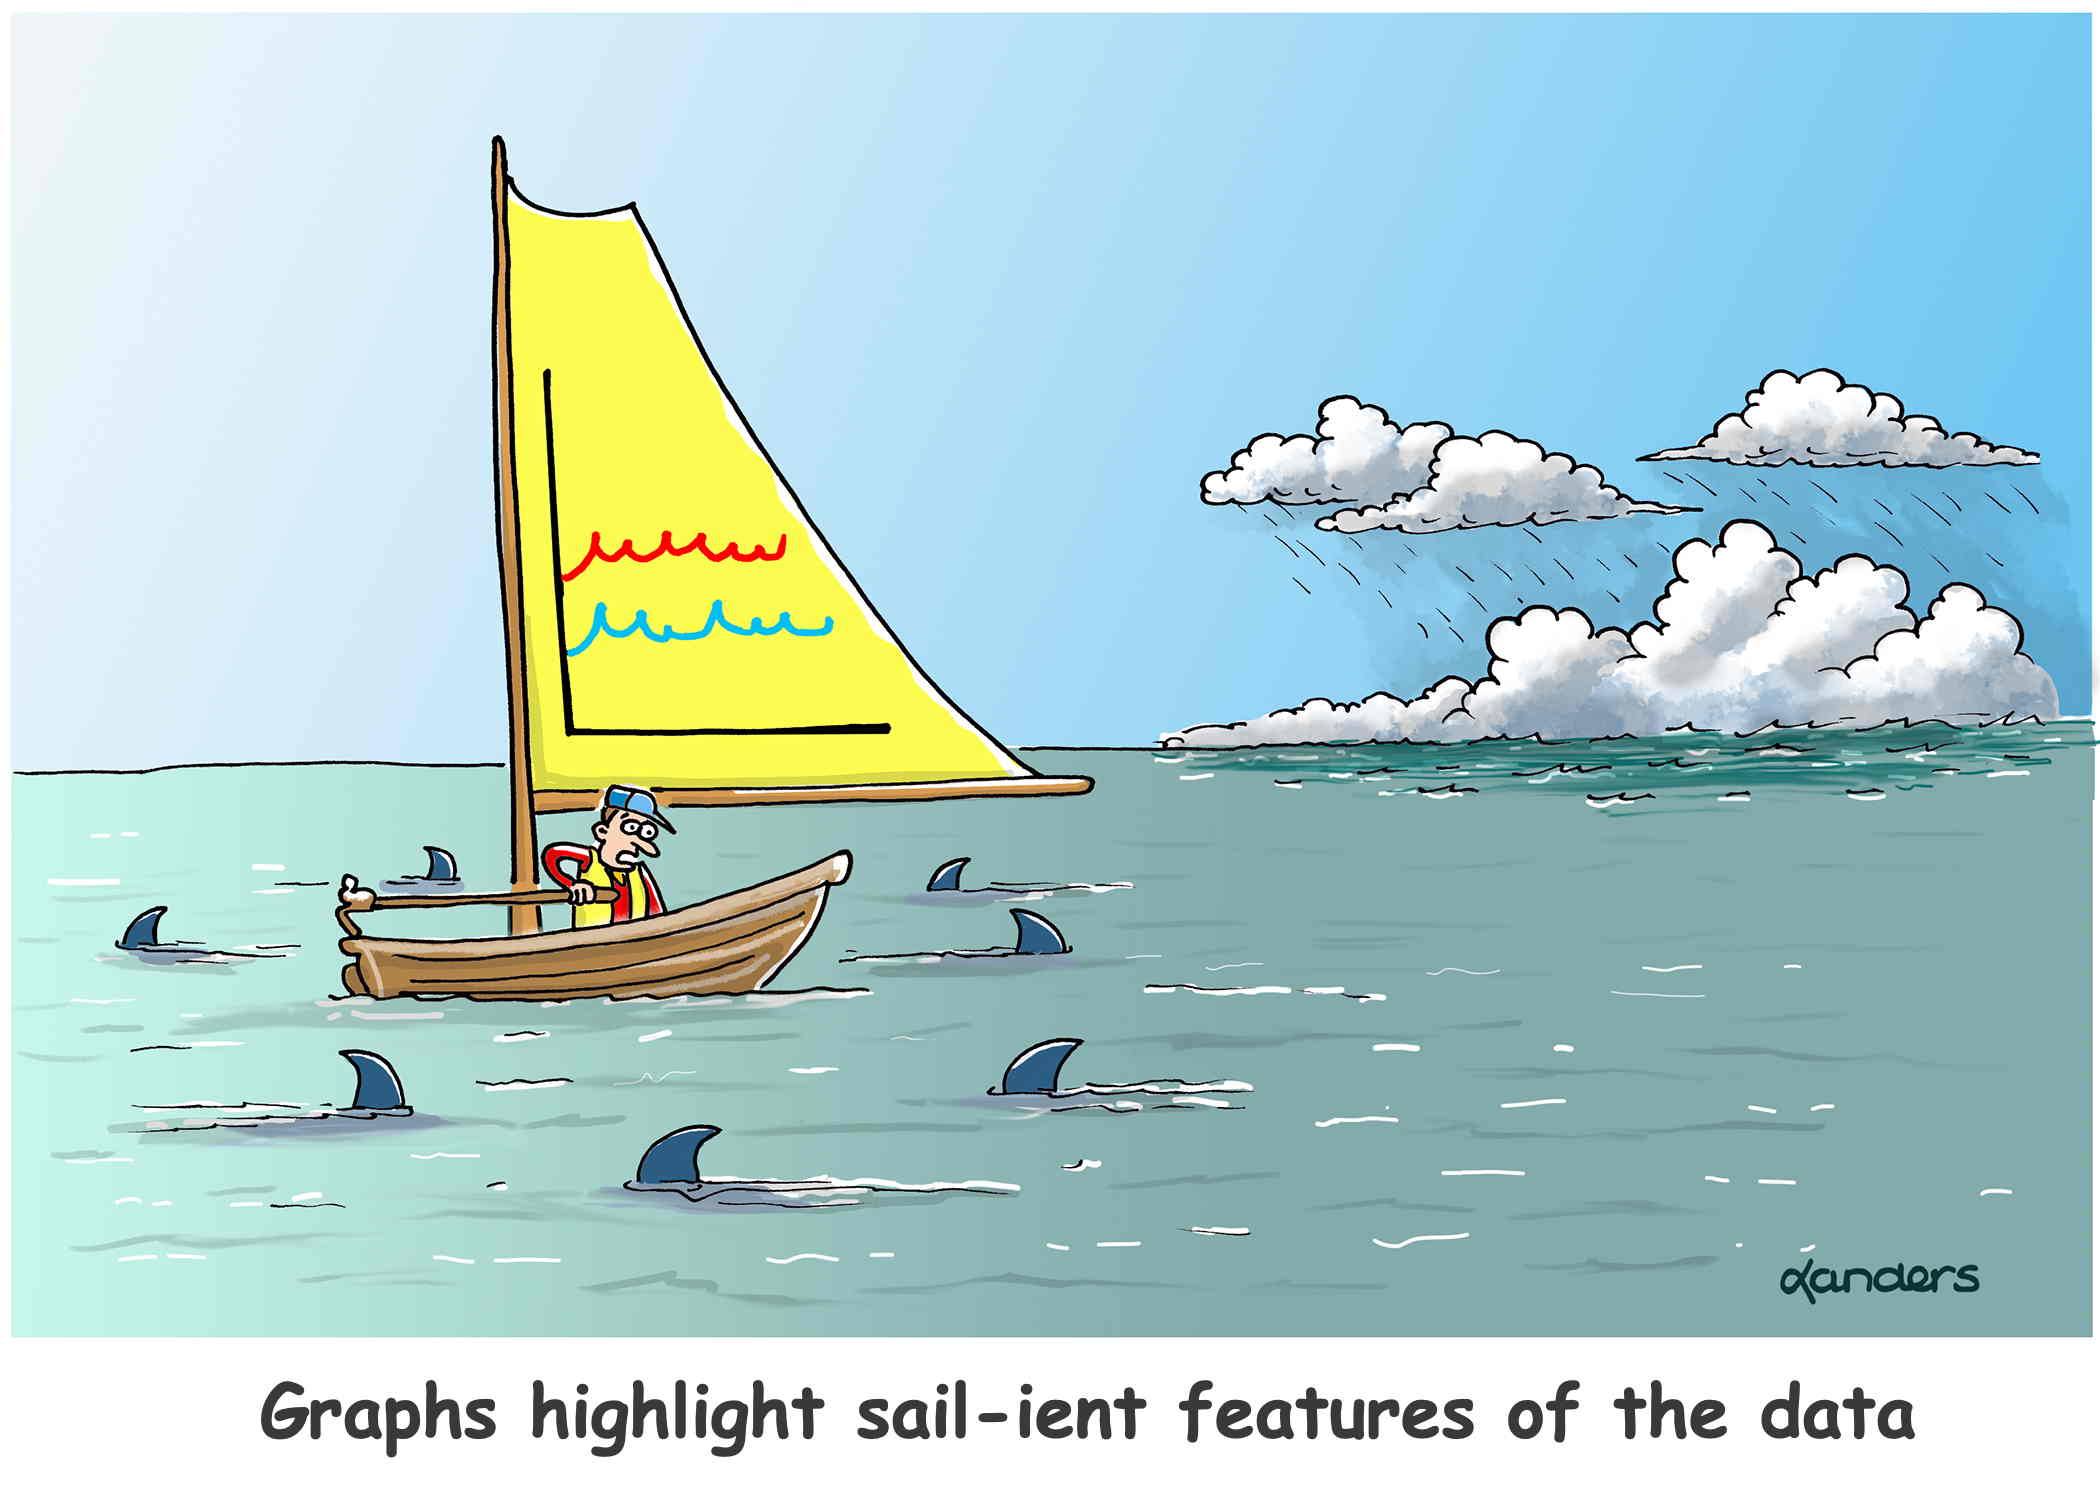 cartoon showing sail boat in shark invested waters with a storm approaching and there is a graph on the sail. Caption says: danders Graphs highlight sail-ient features of the data